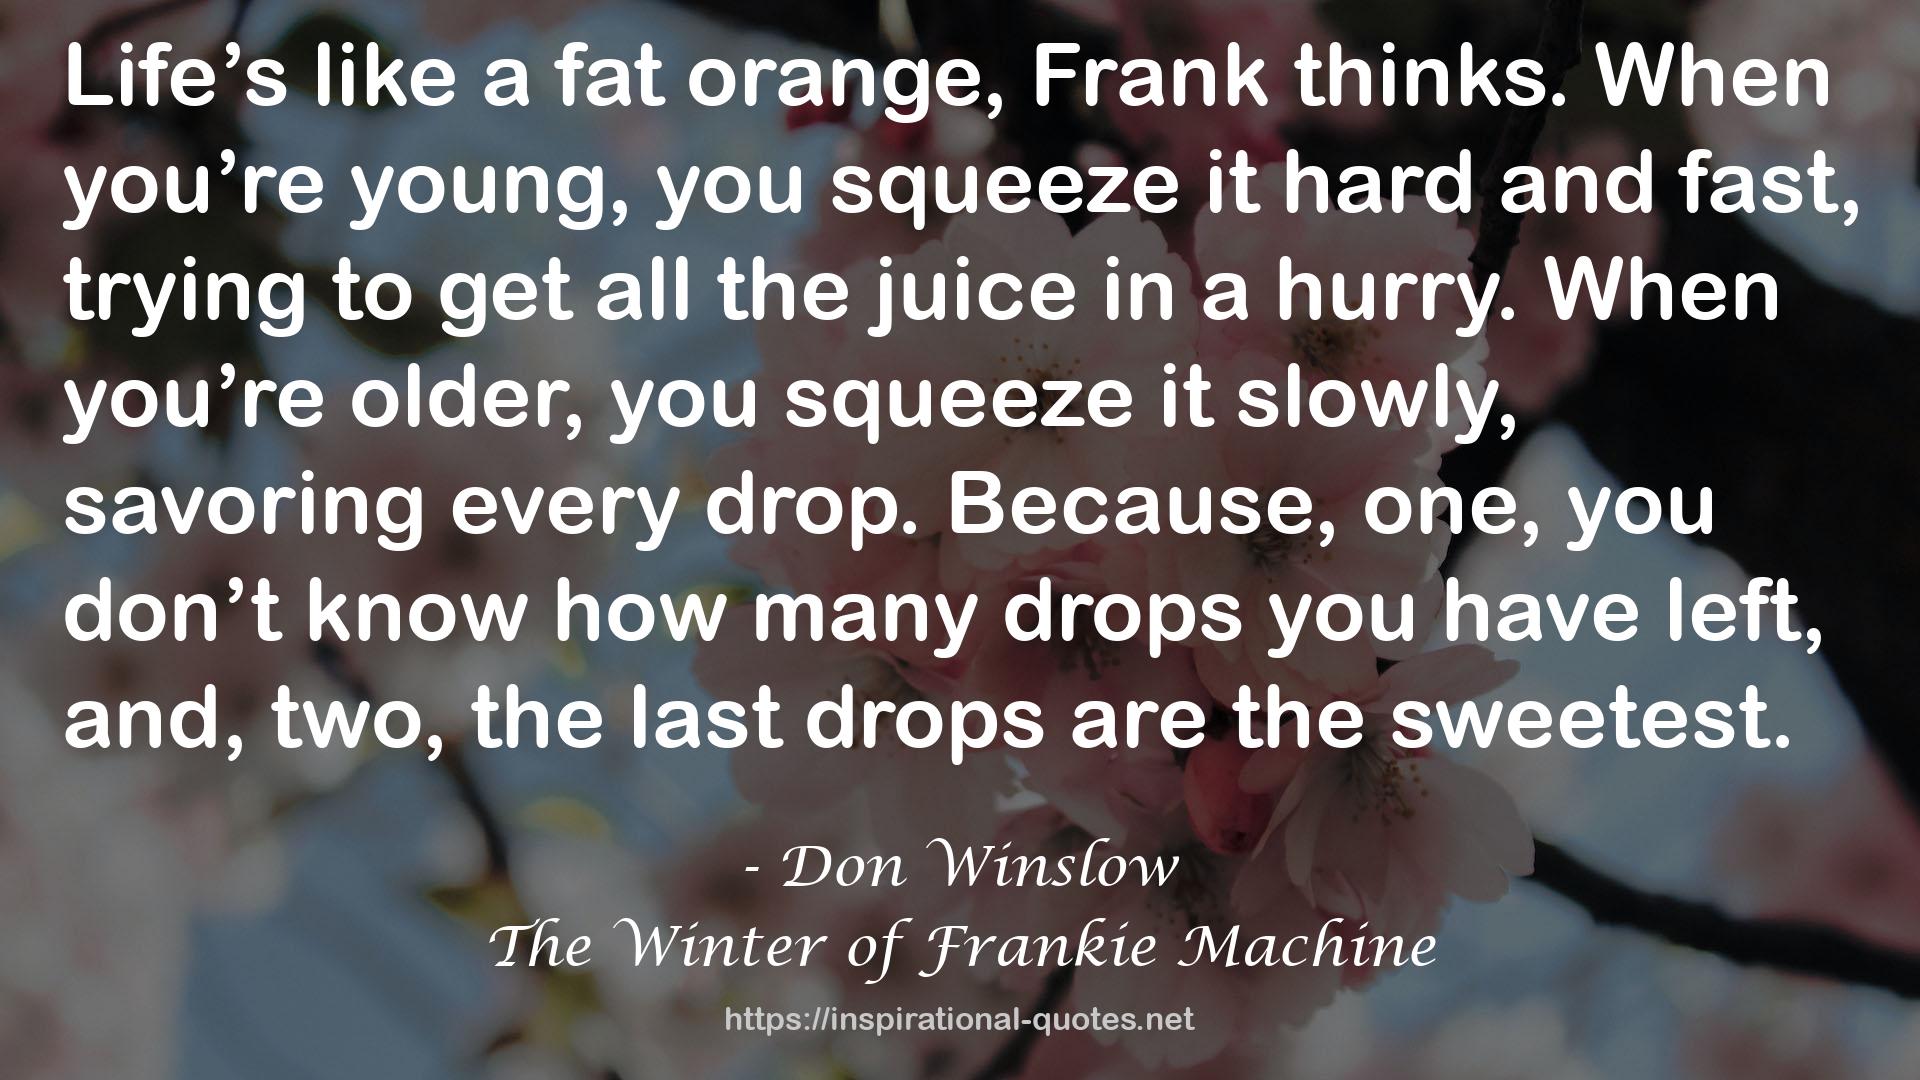 The Winter of Frankie Machine QUOTES